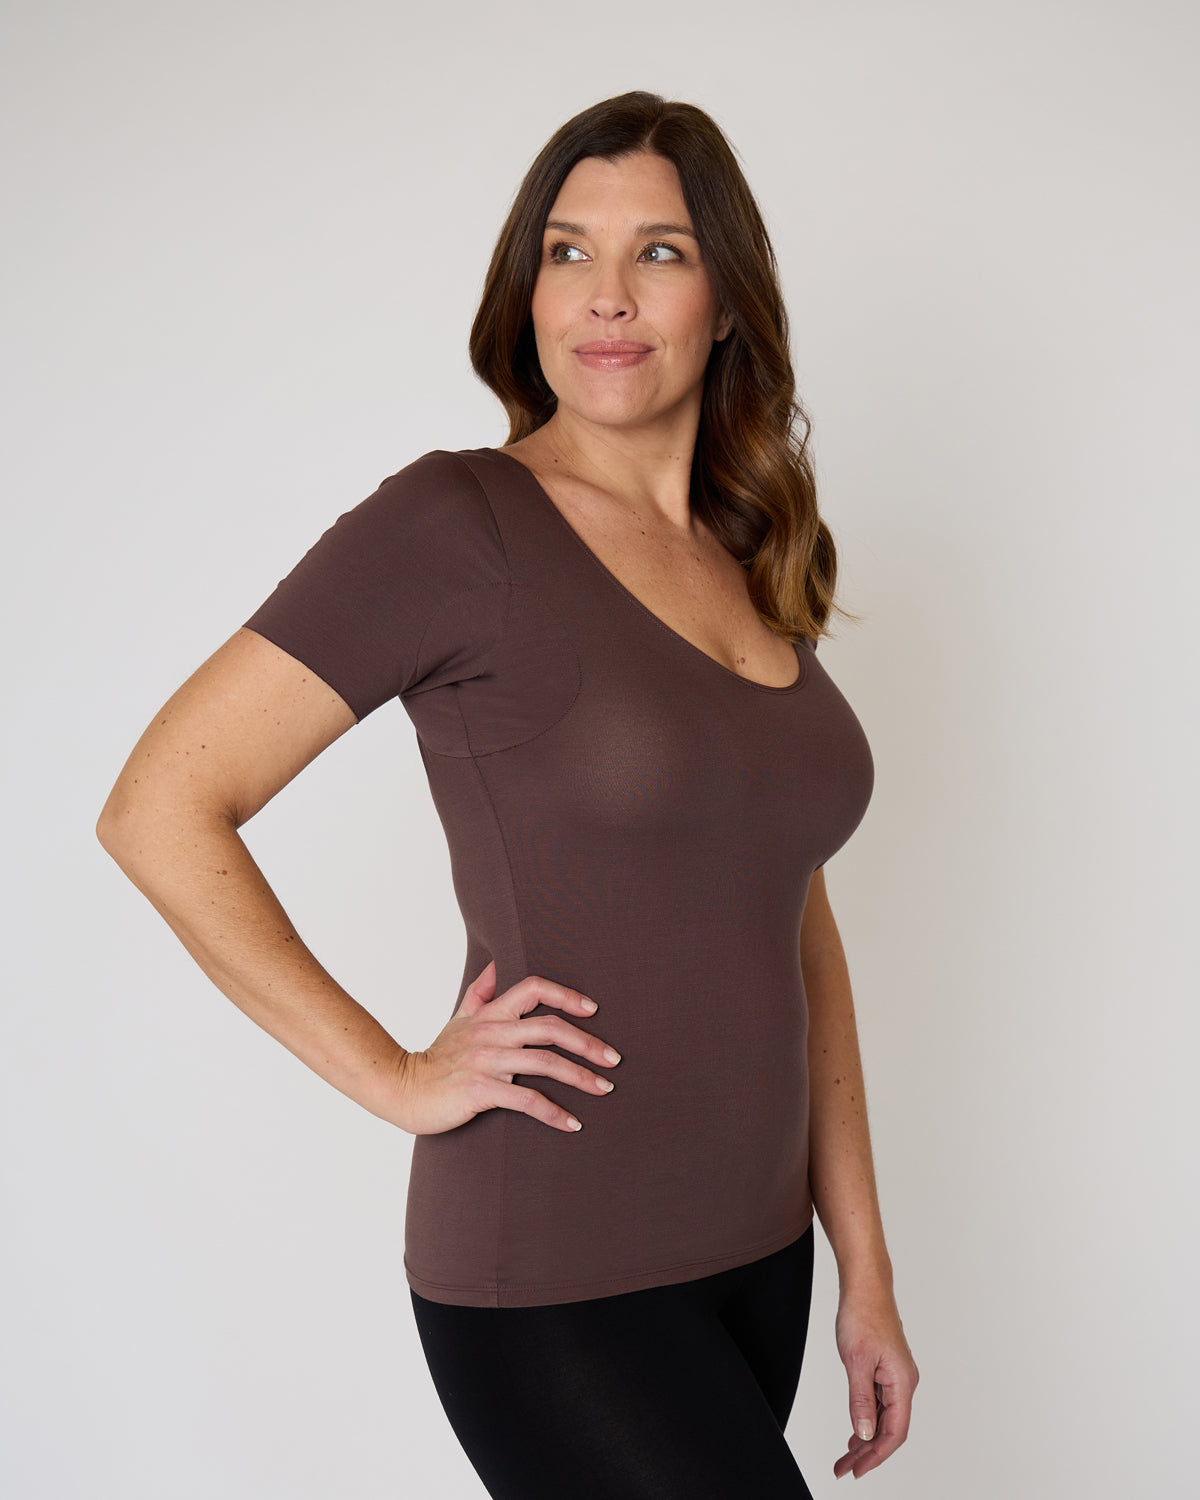 "#color_TRUFFLE | Ashleigh is 5’11” and wears a size L